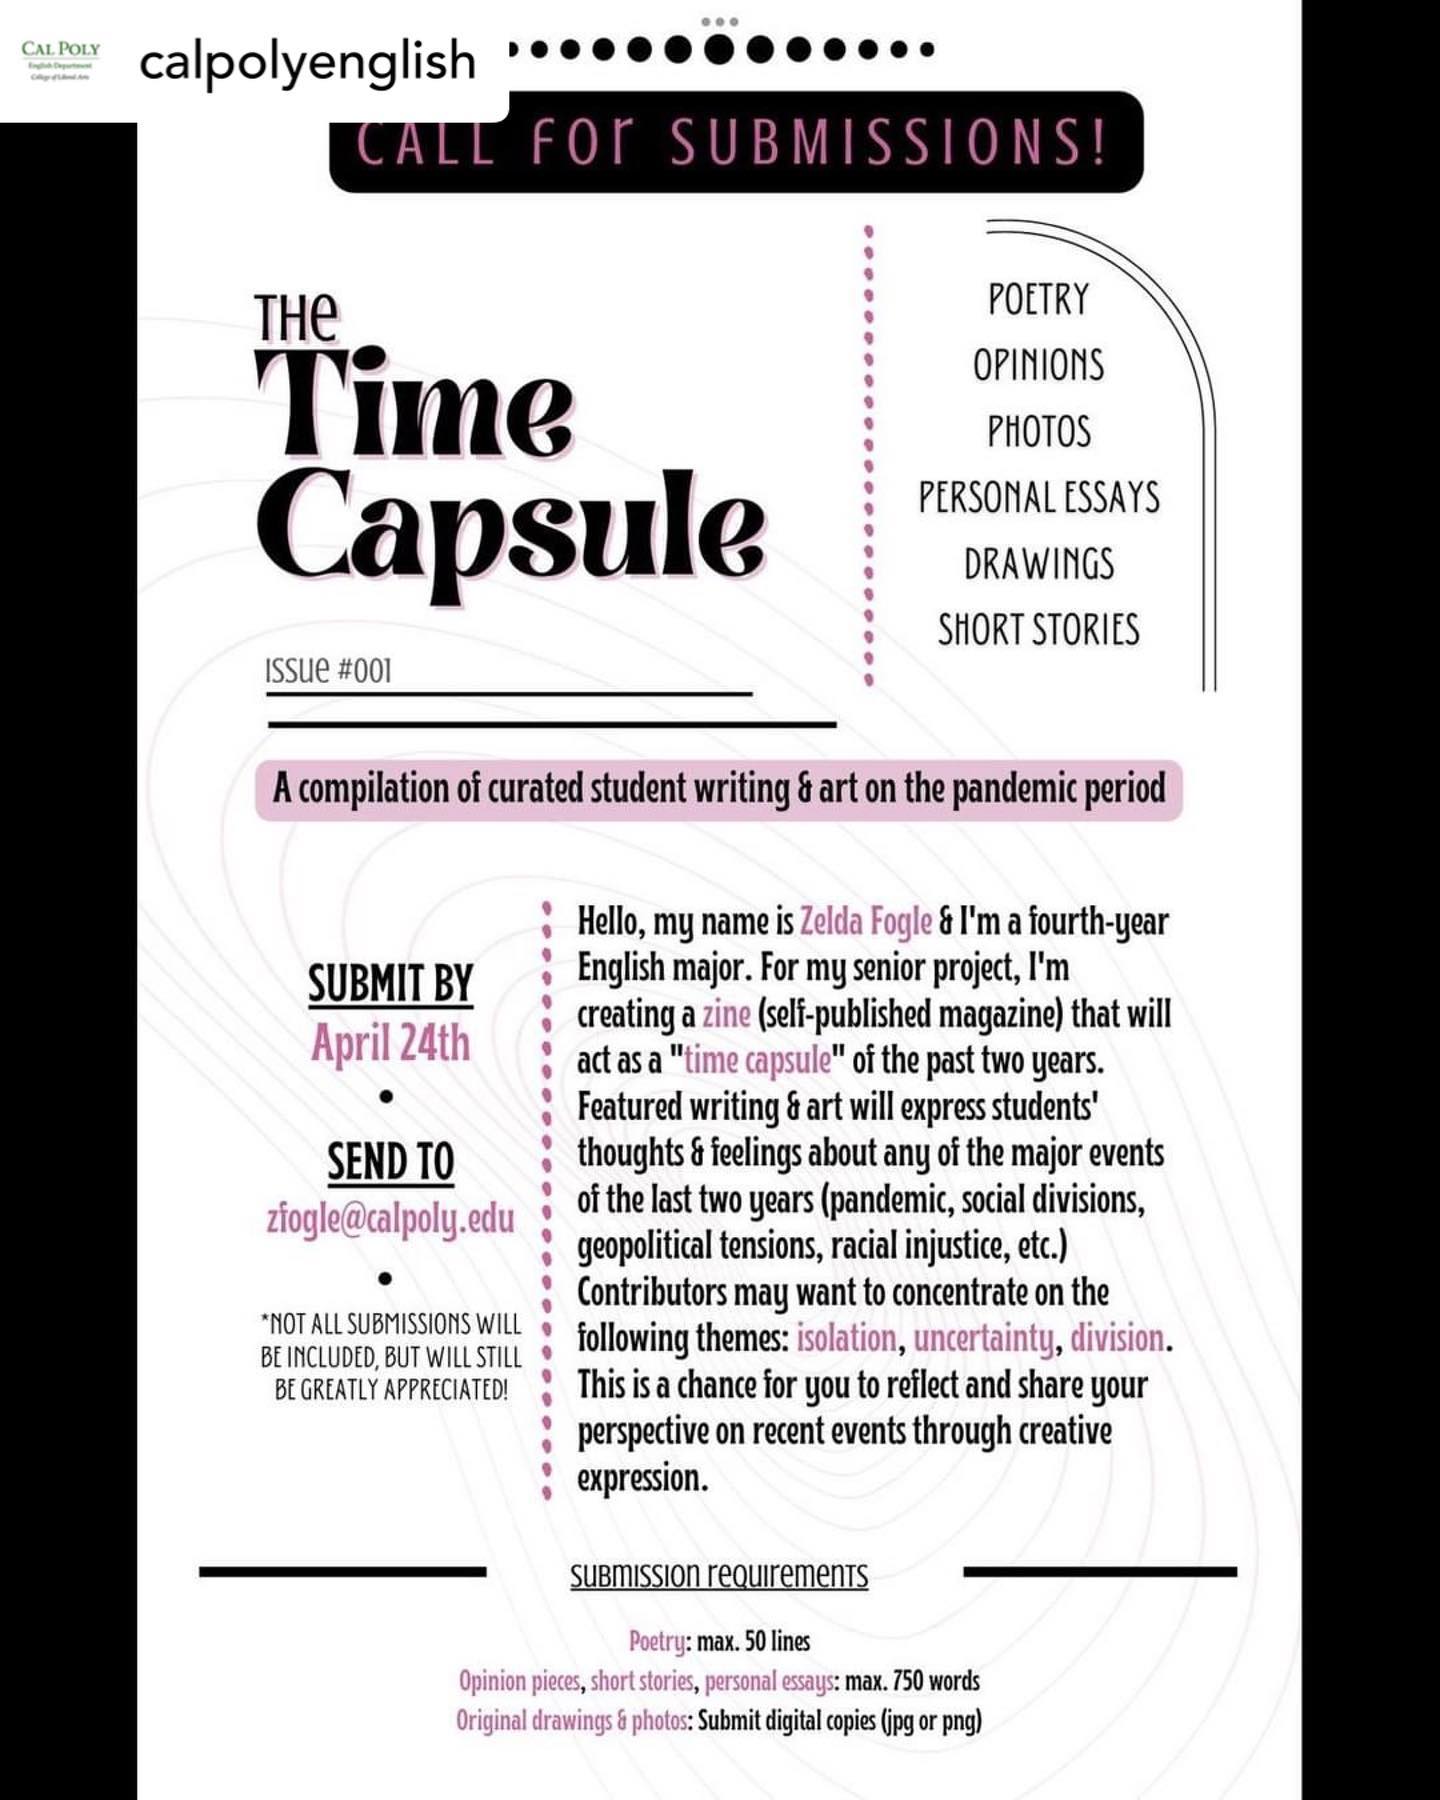 What a beautiful idea for a senior project from a student at my undergrad alma mater. I hope to read a copy when it’s finished. Reposted from @calpolyenglish • The submission deadline for The Time Capsule zine is this Sunday, April 24th. It’s an excellent opportunity to share your writing and/or art with others in the Cal Poly community. This senior project relies heavily on student submissions, so any relevant contribution would be greatly appreciated. 
  #calpoly #calpolyslo #calpolyenglish #english